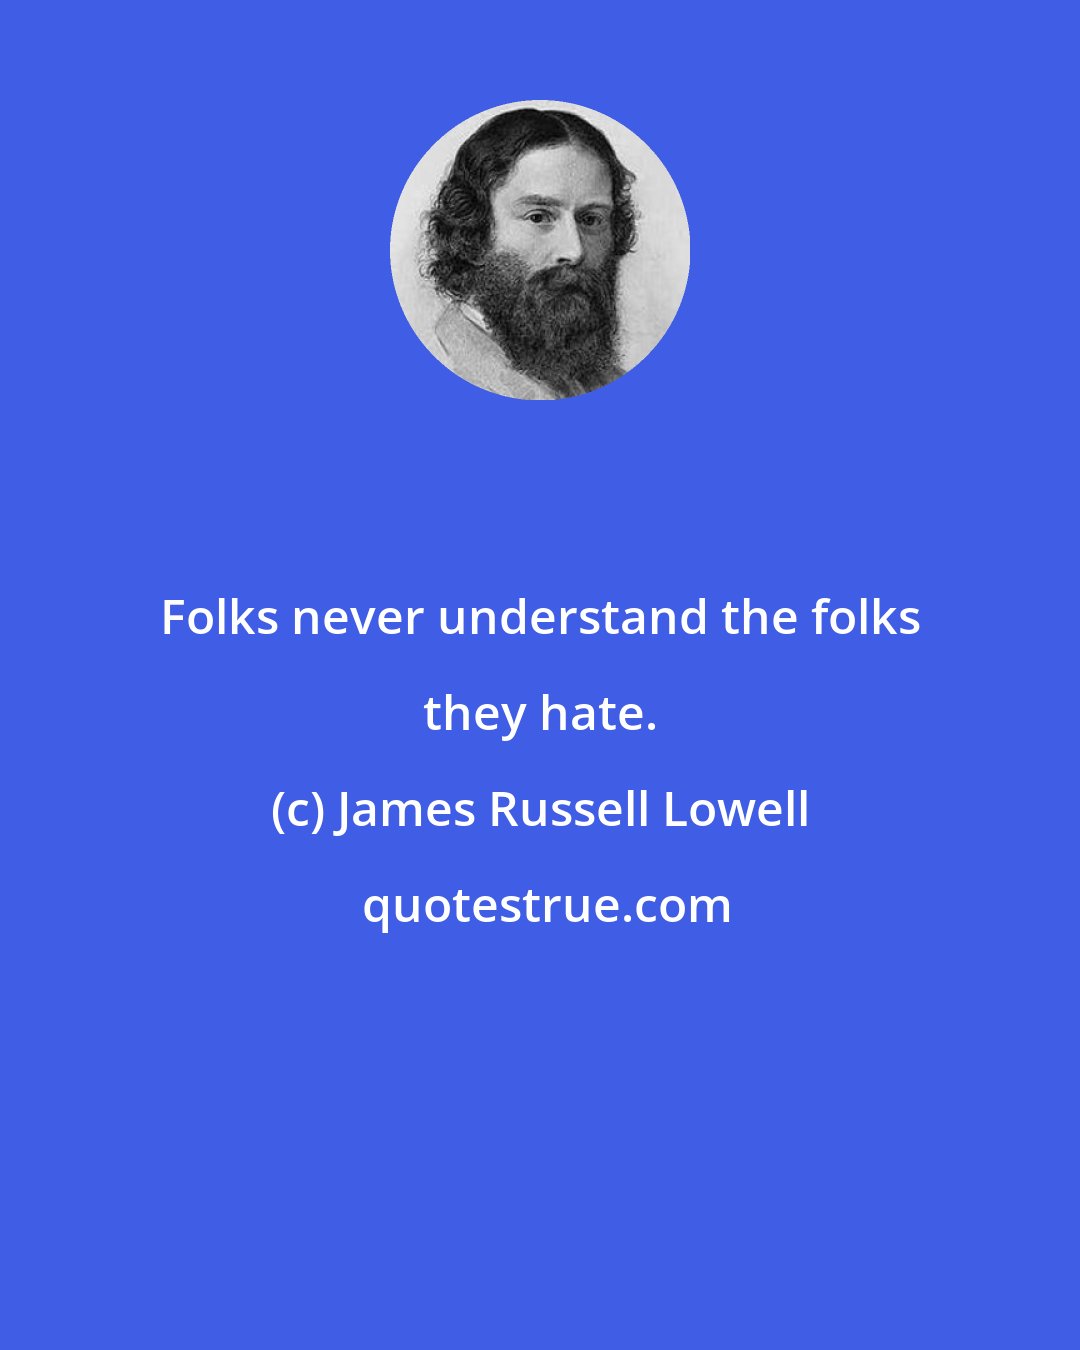 James Russell Lowell: Folks never understand the folks they hate.